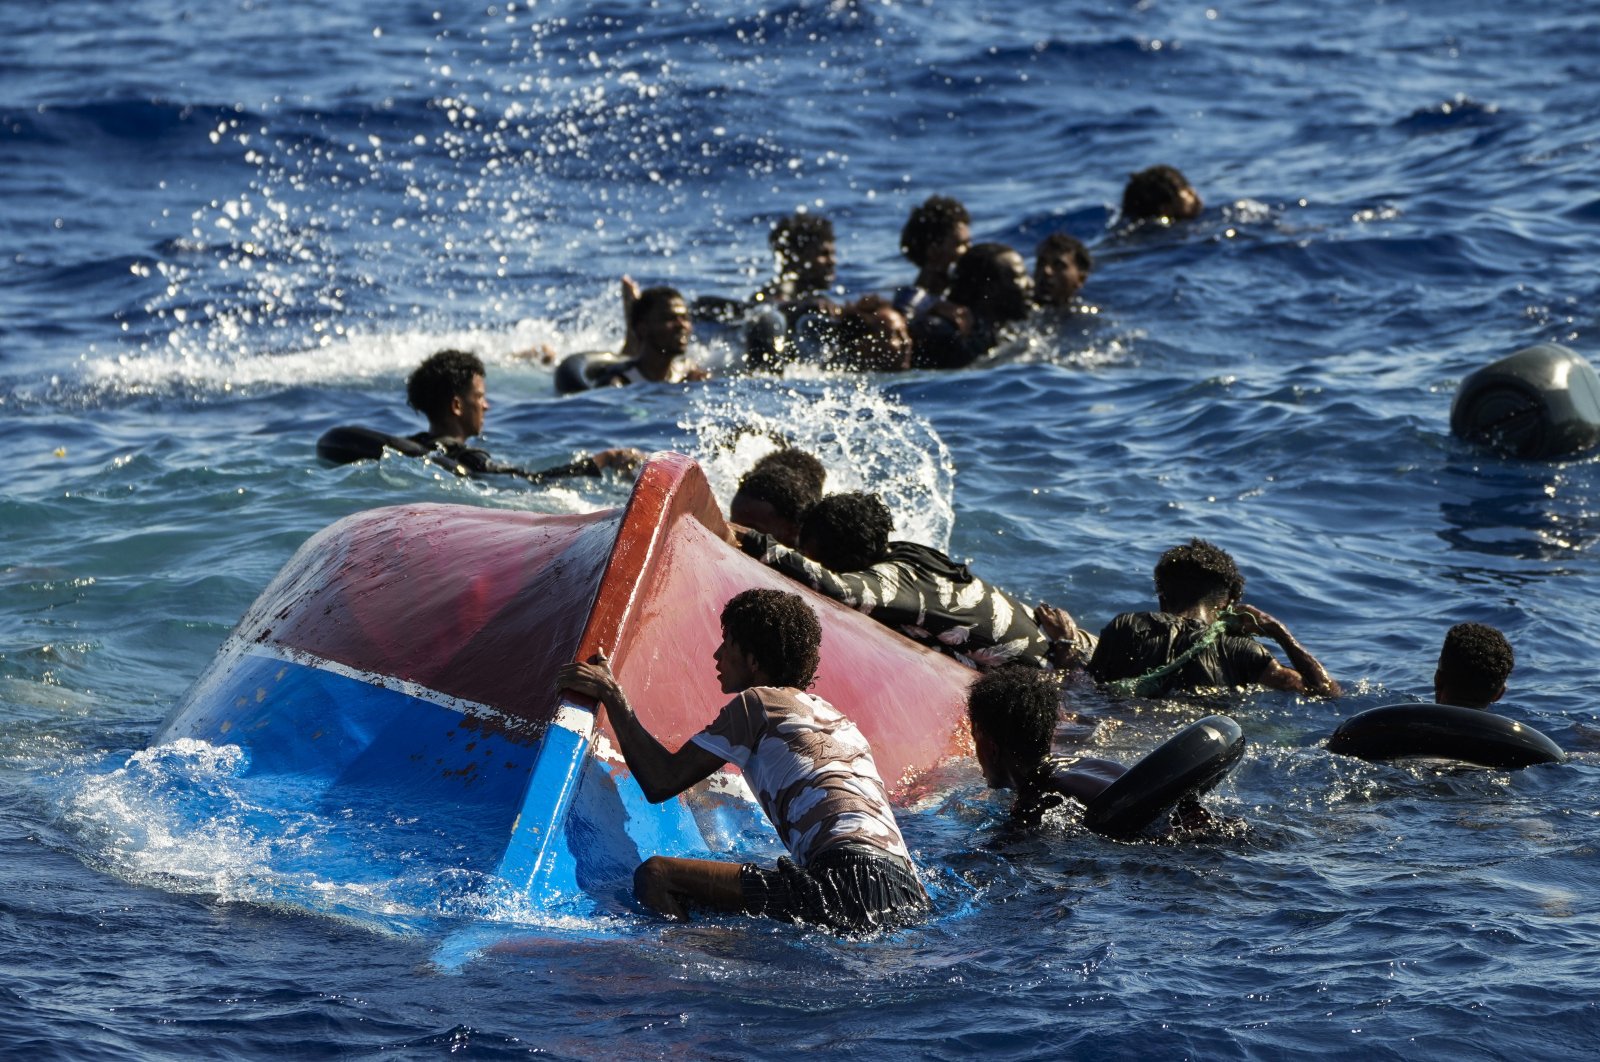 Migrants swim next to their overturned wooden boat during a rescue operation by Spanish NGO Open Arms south of the Italian Lampedusa island in the Mediterranean Sea, Thursday, Aug. 11, 2022. (AP File Photo)